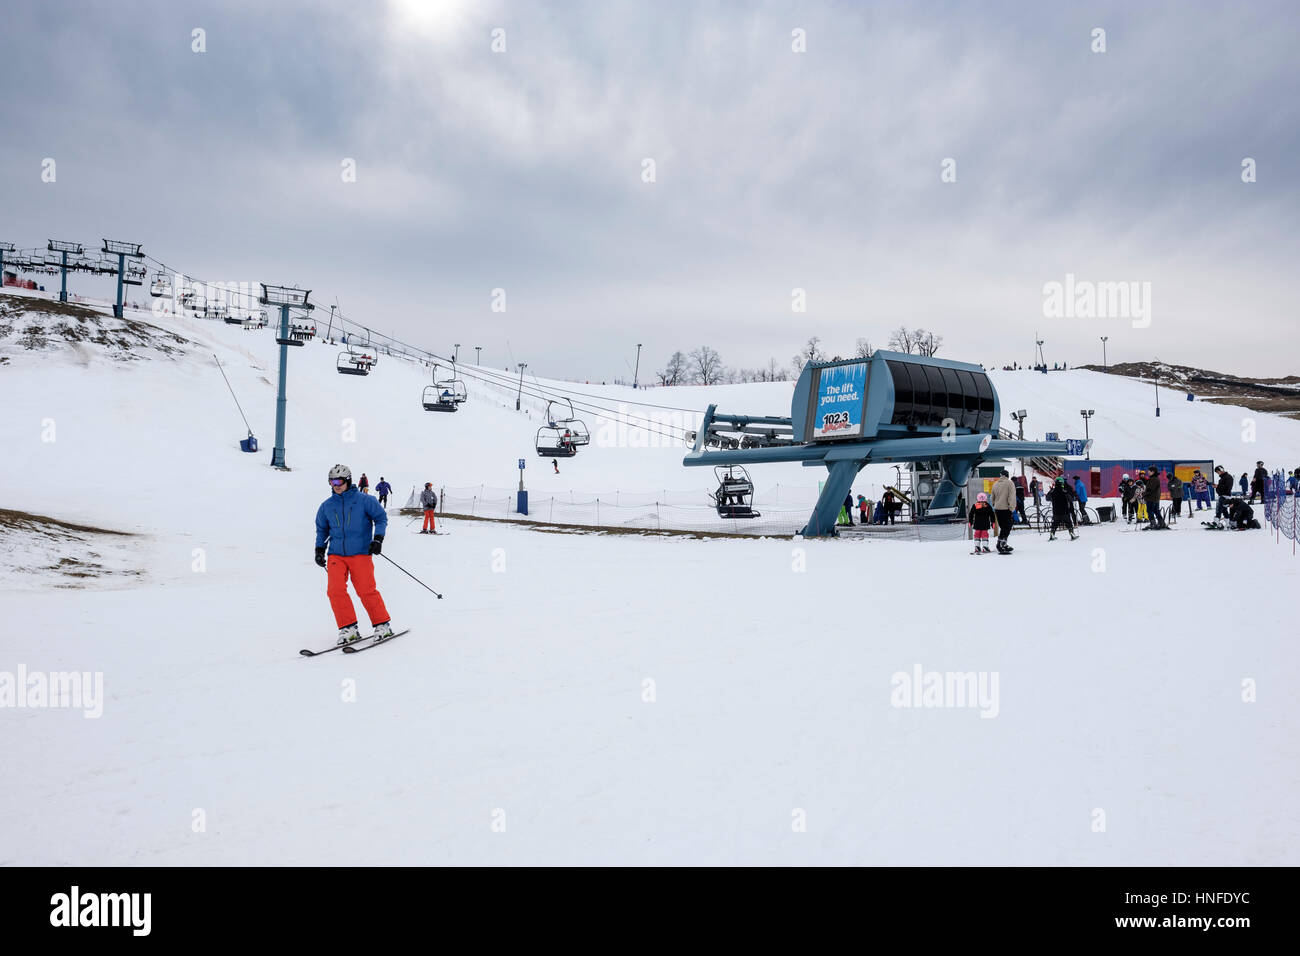 Lineup of skiers waiting for a ski lift at Boler Mountain Ski Club in London, Ontario, Canada. Stock Photo